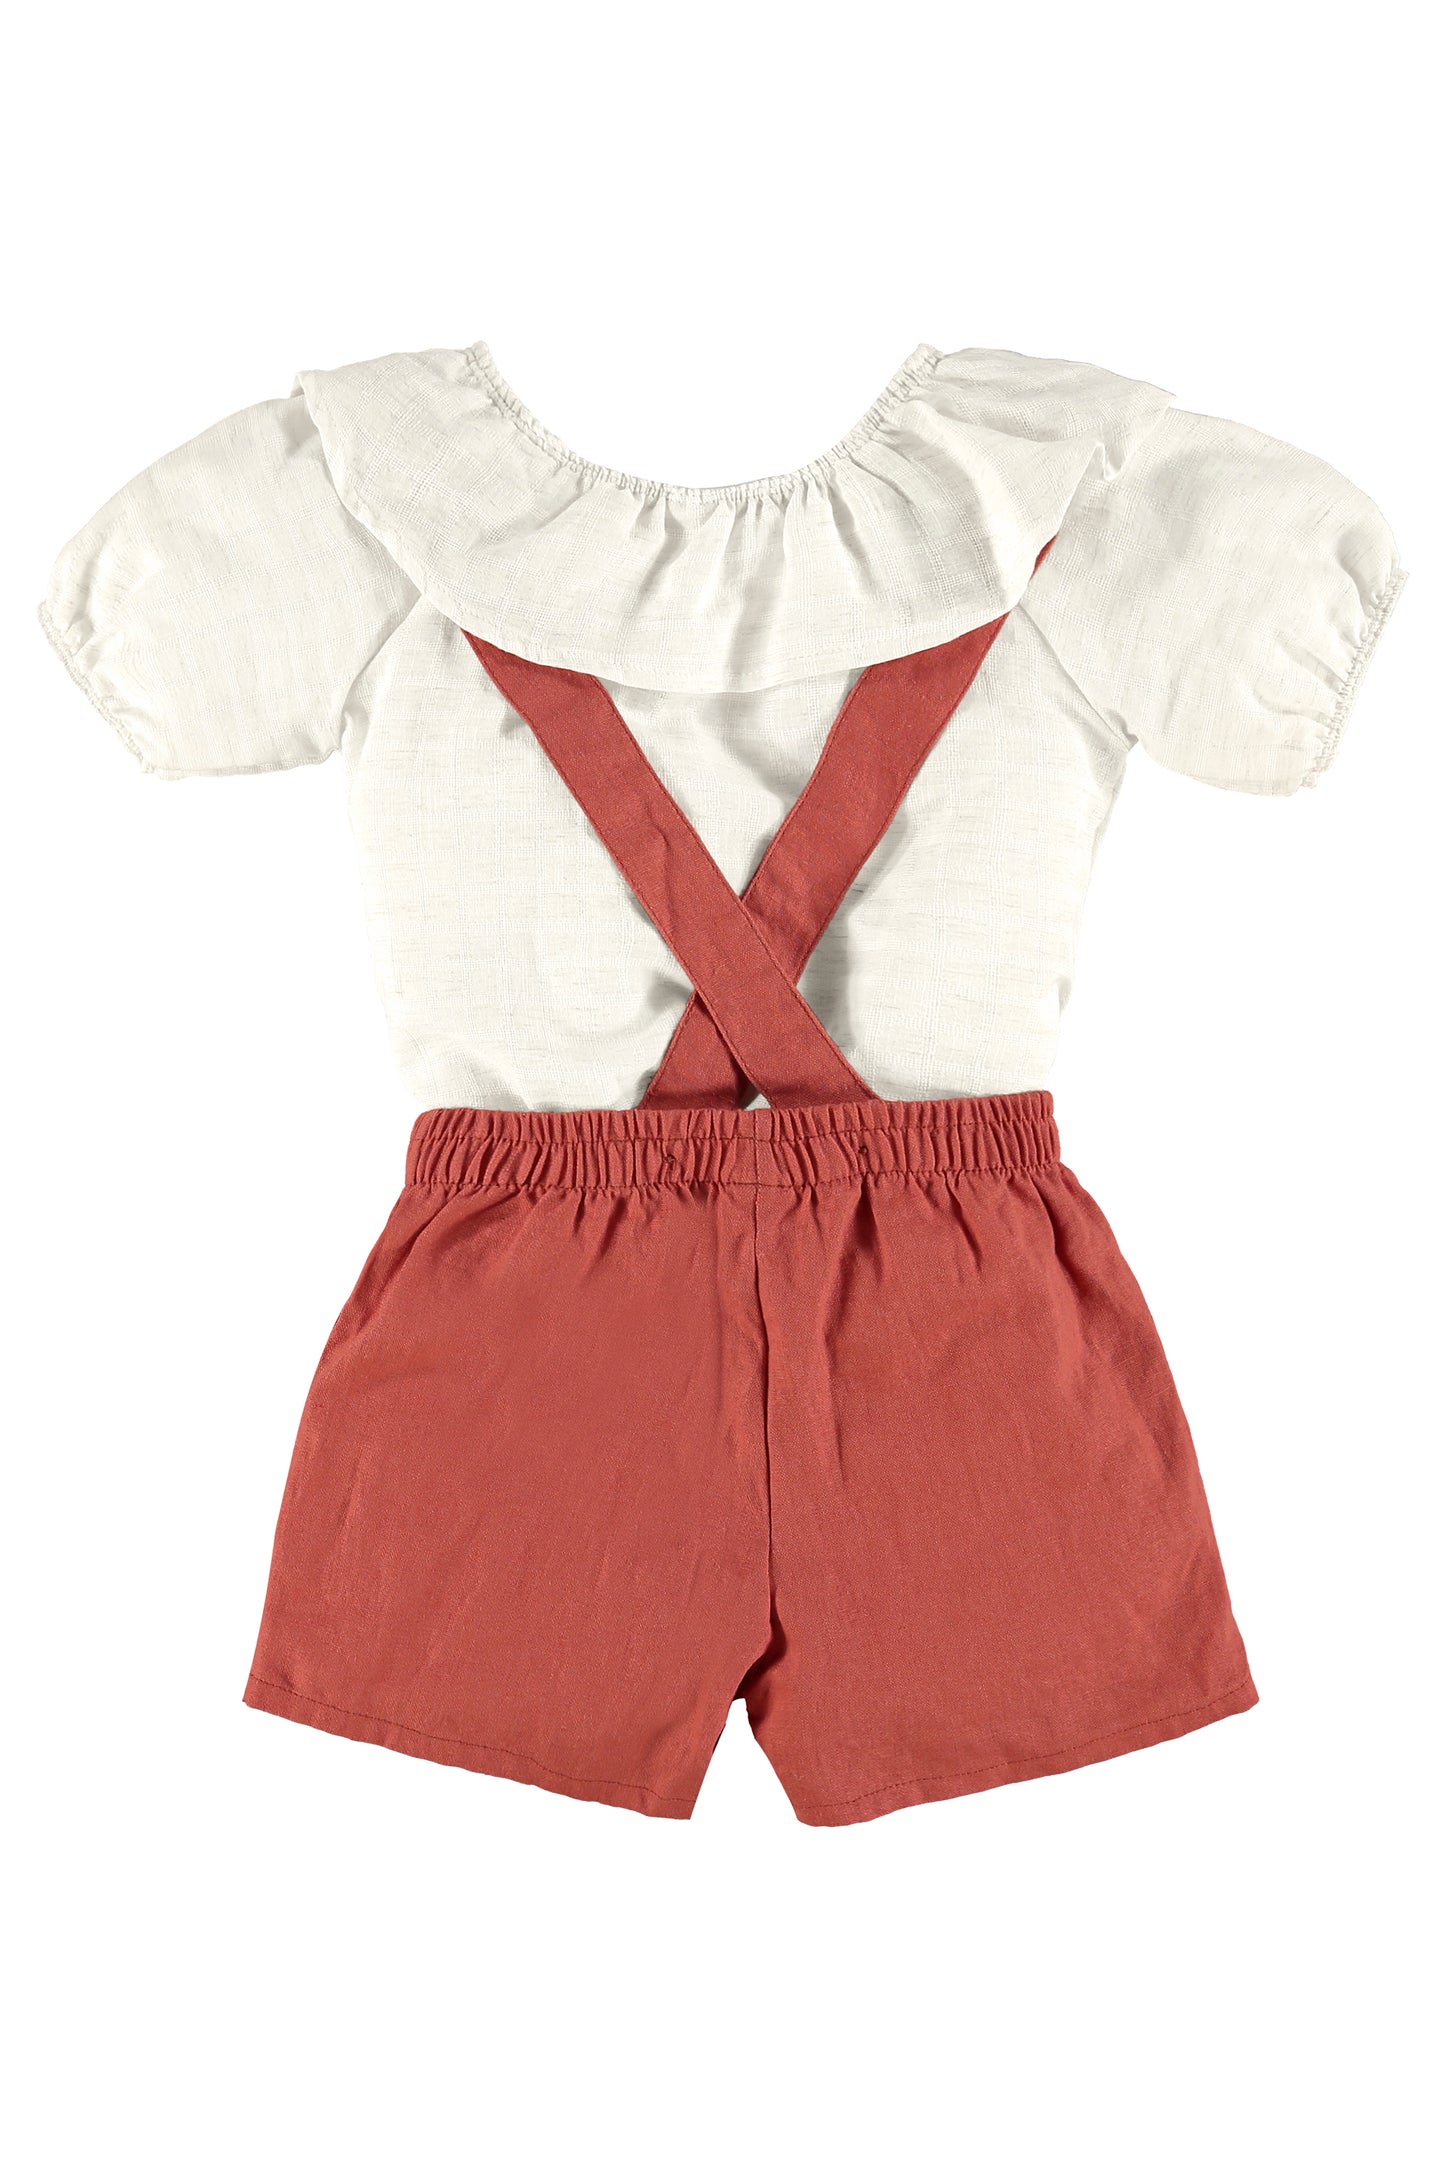 Linen Blouse & Shorts with Suspenders